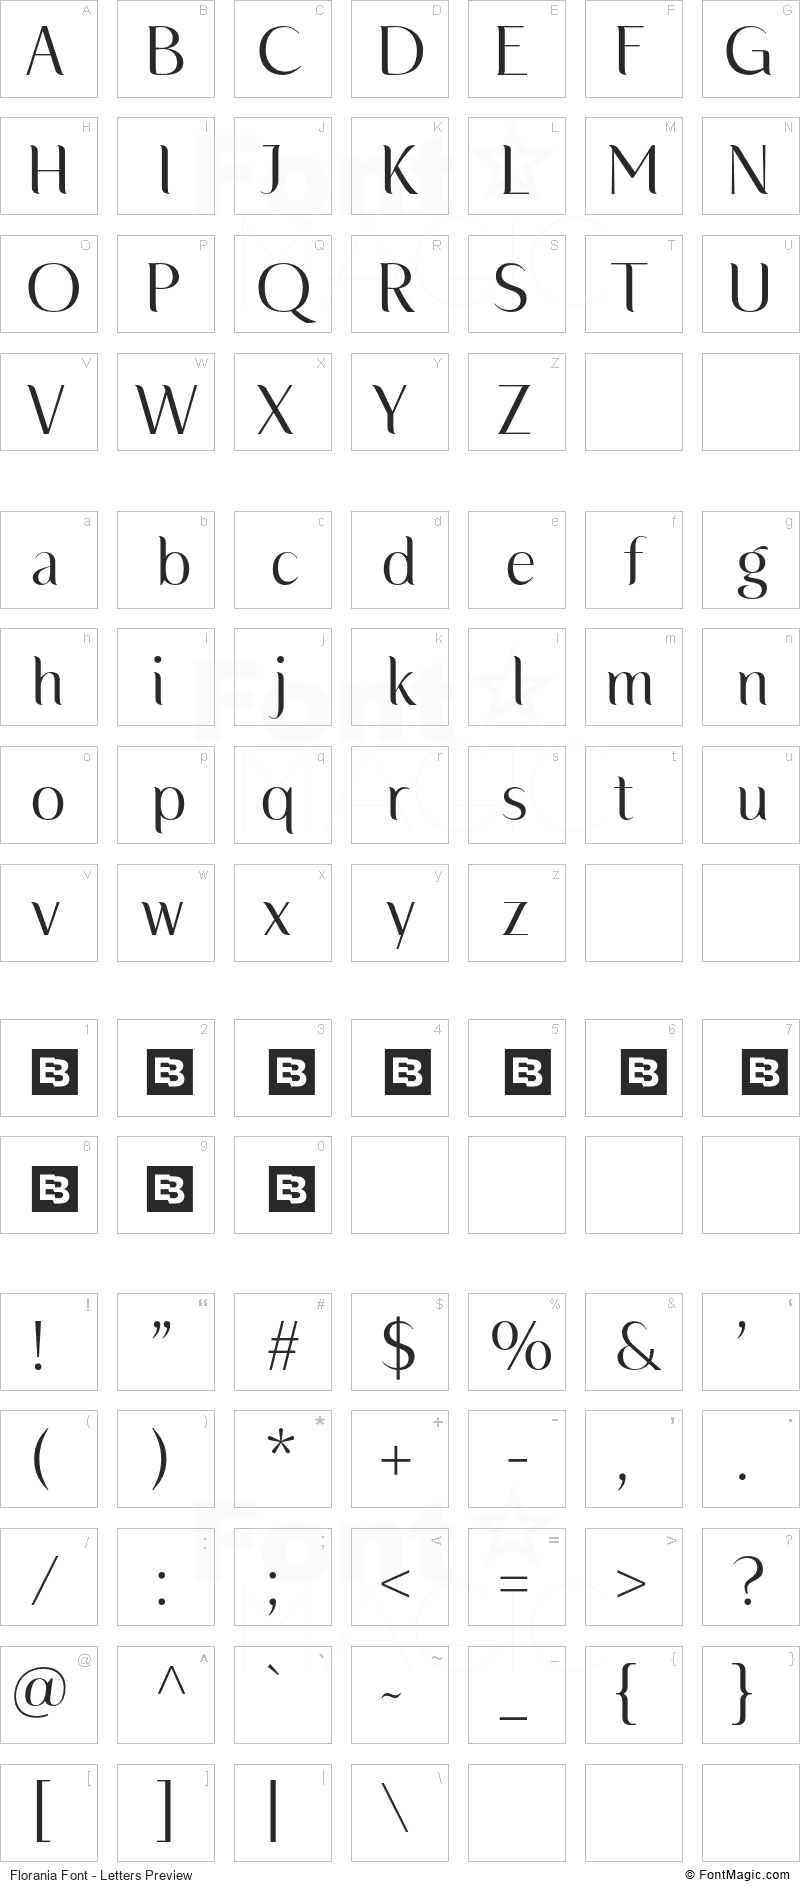 Florania Font - All Latters Preview Chart